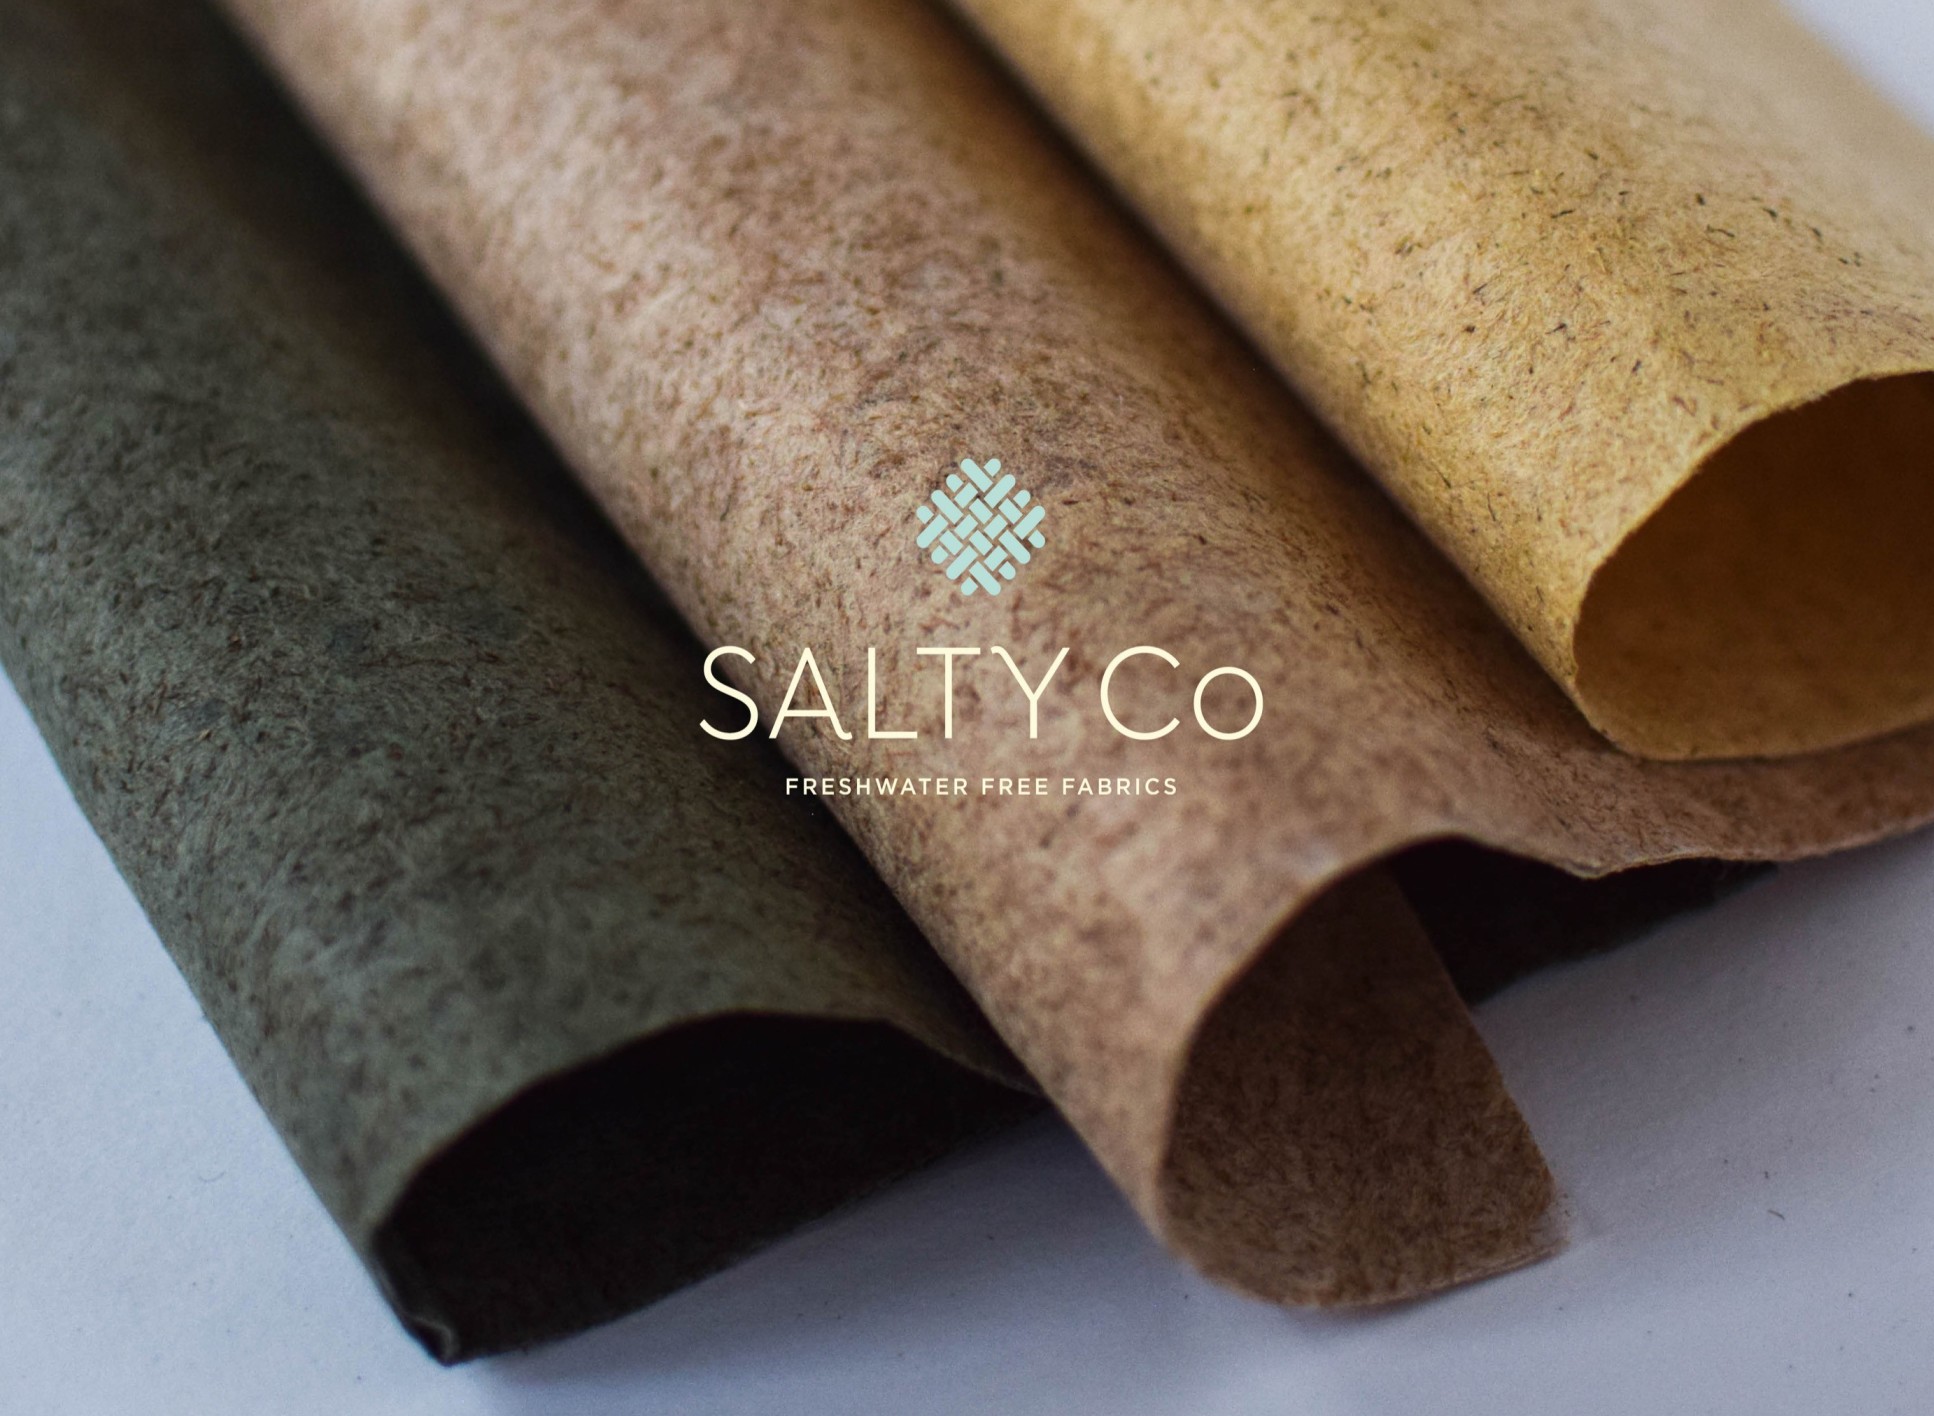 Image of materials created by Salty Co